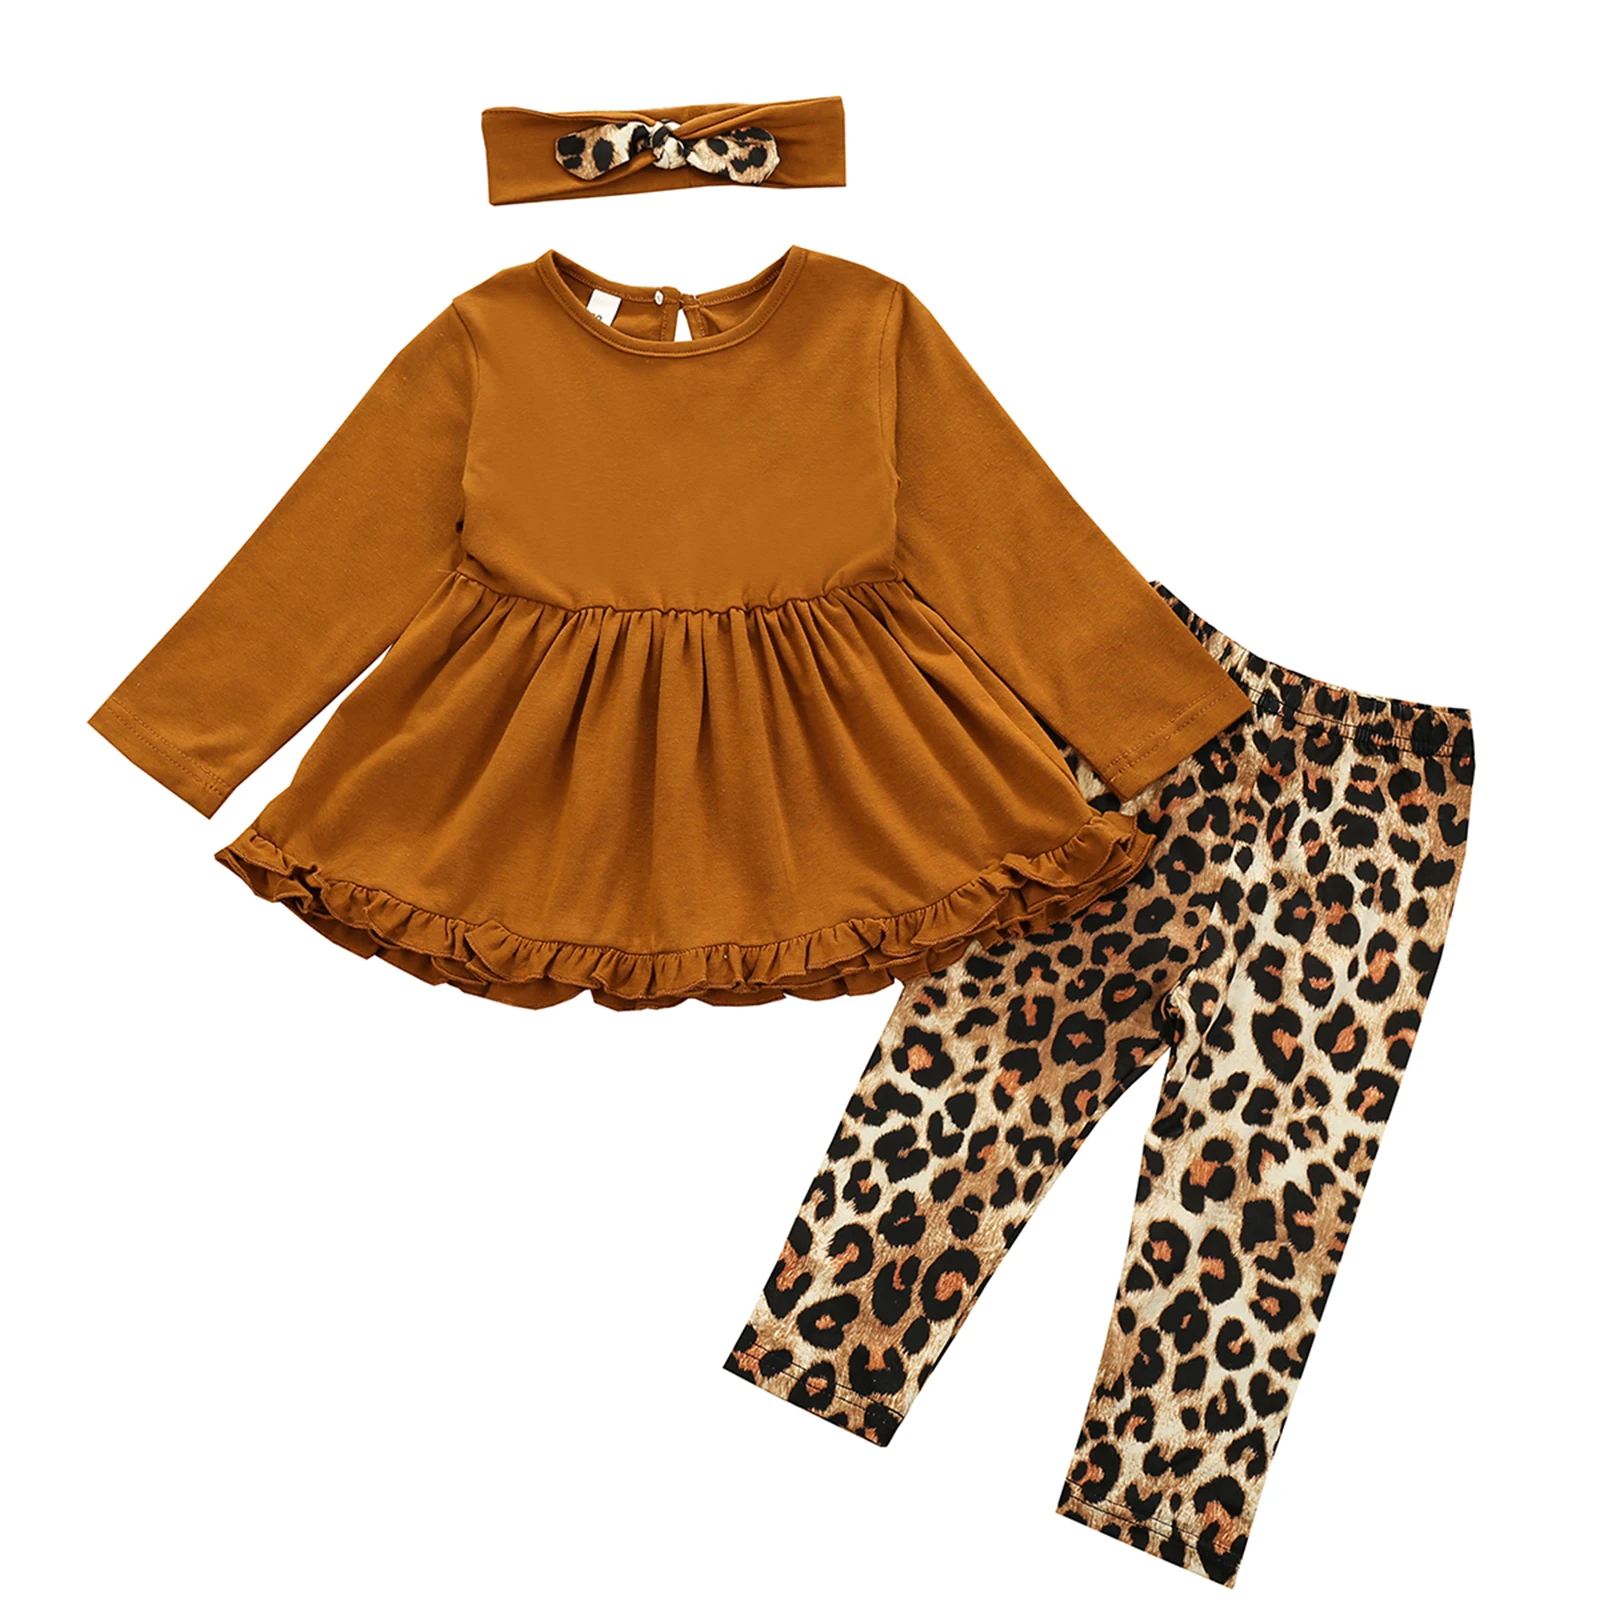 

3Pcs Baby Infant Girls Sets Long Sleeve Solid Ruffle O Neck Solid Tops Leopard Pants Headband Autumn Children Outfits 6M-4Y